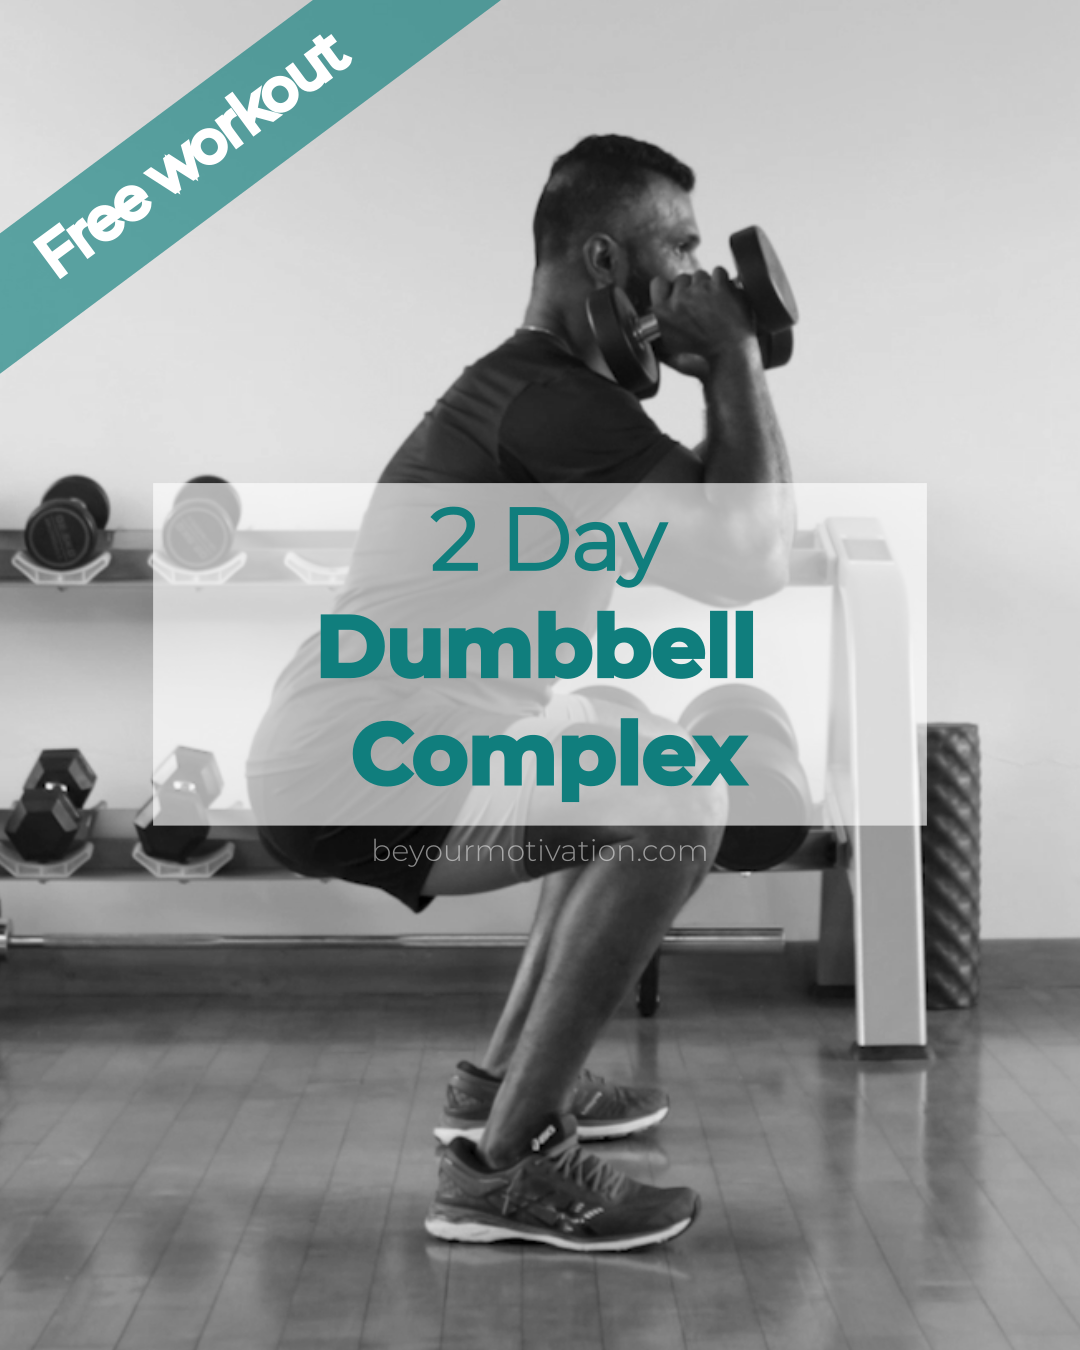 Dumbbell Complex – 2 Day